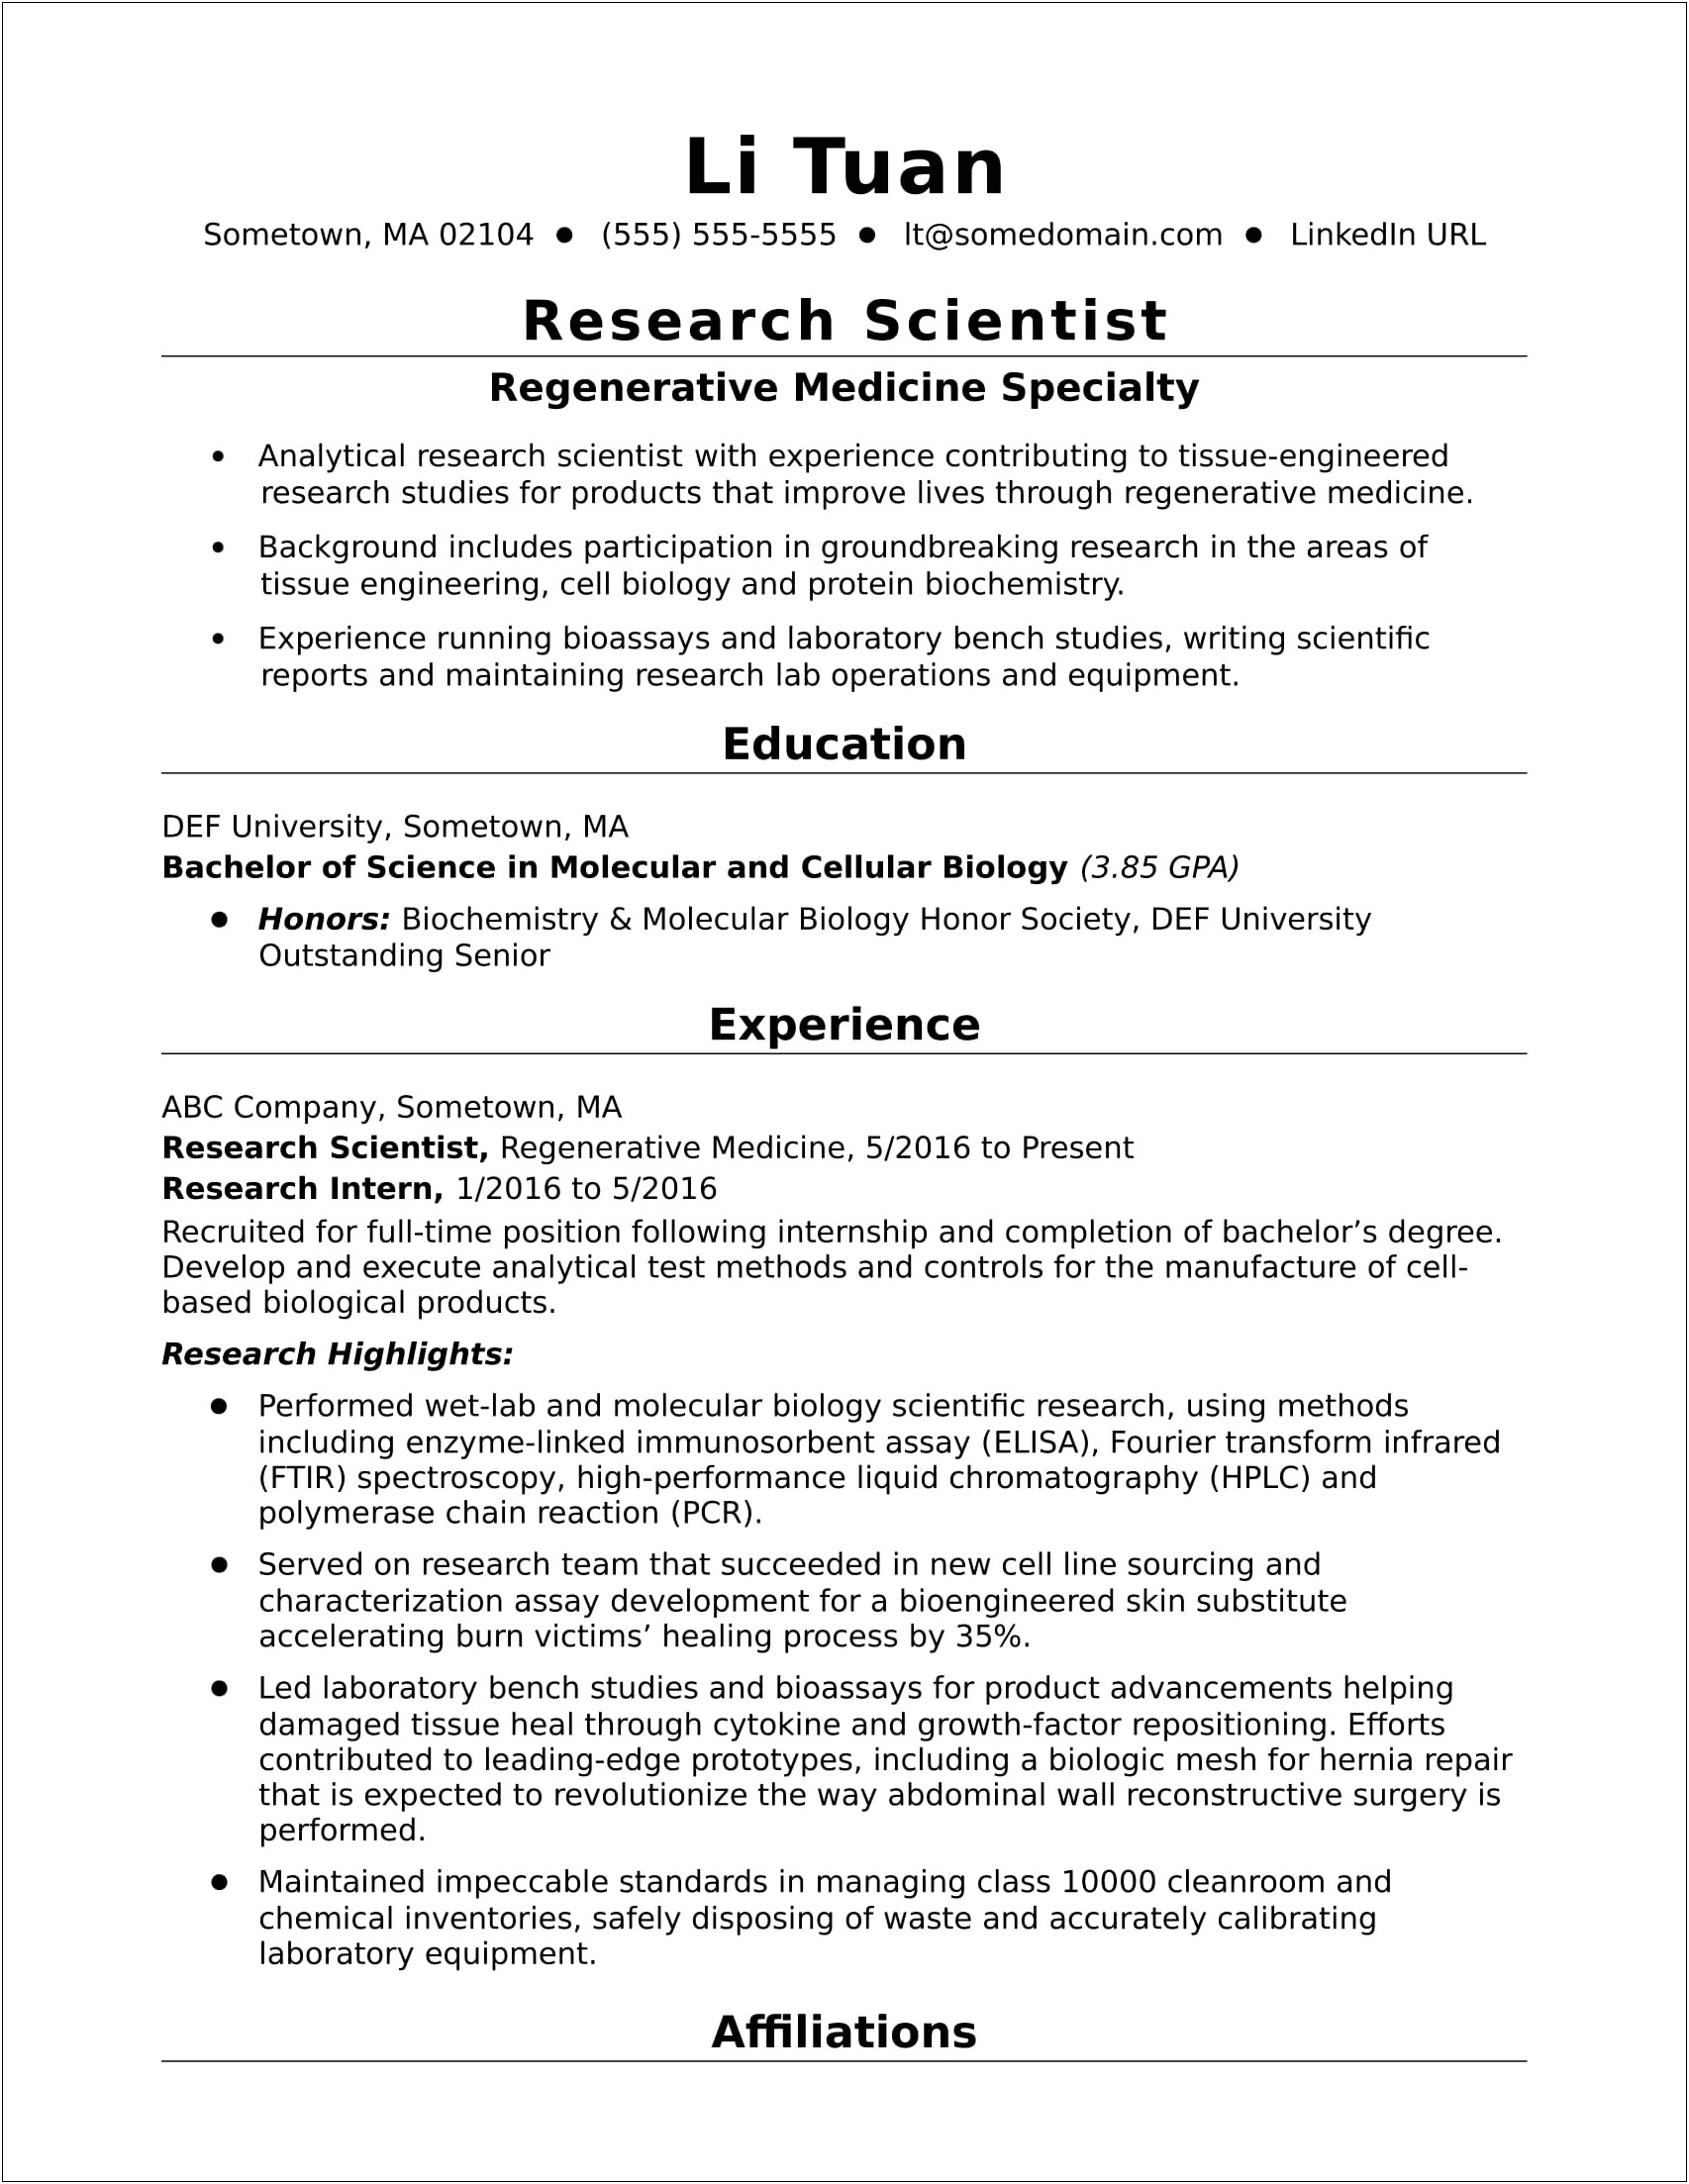 Clinical Research Assistant Resume Sample Publication